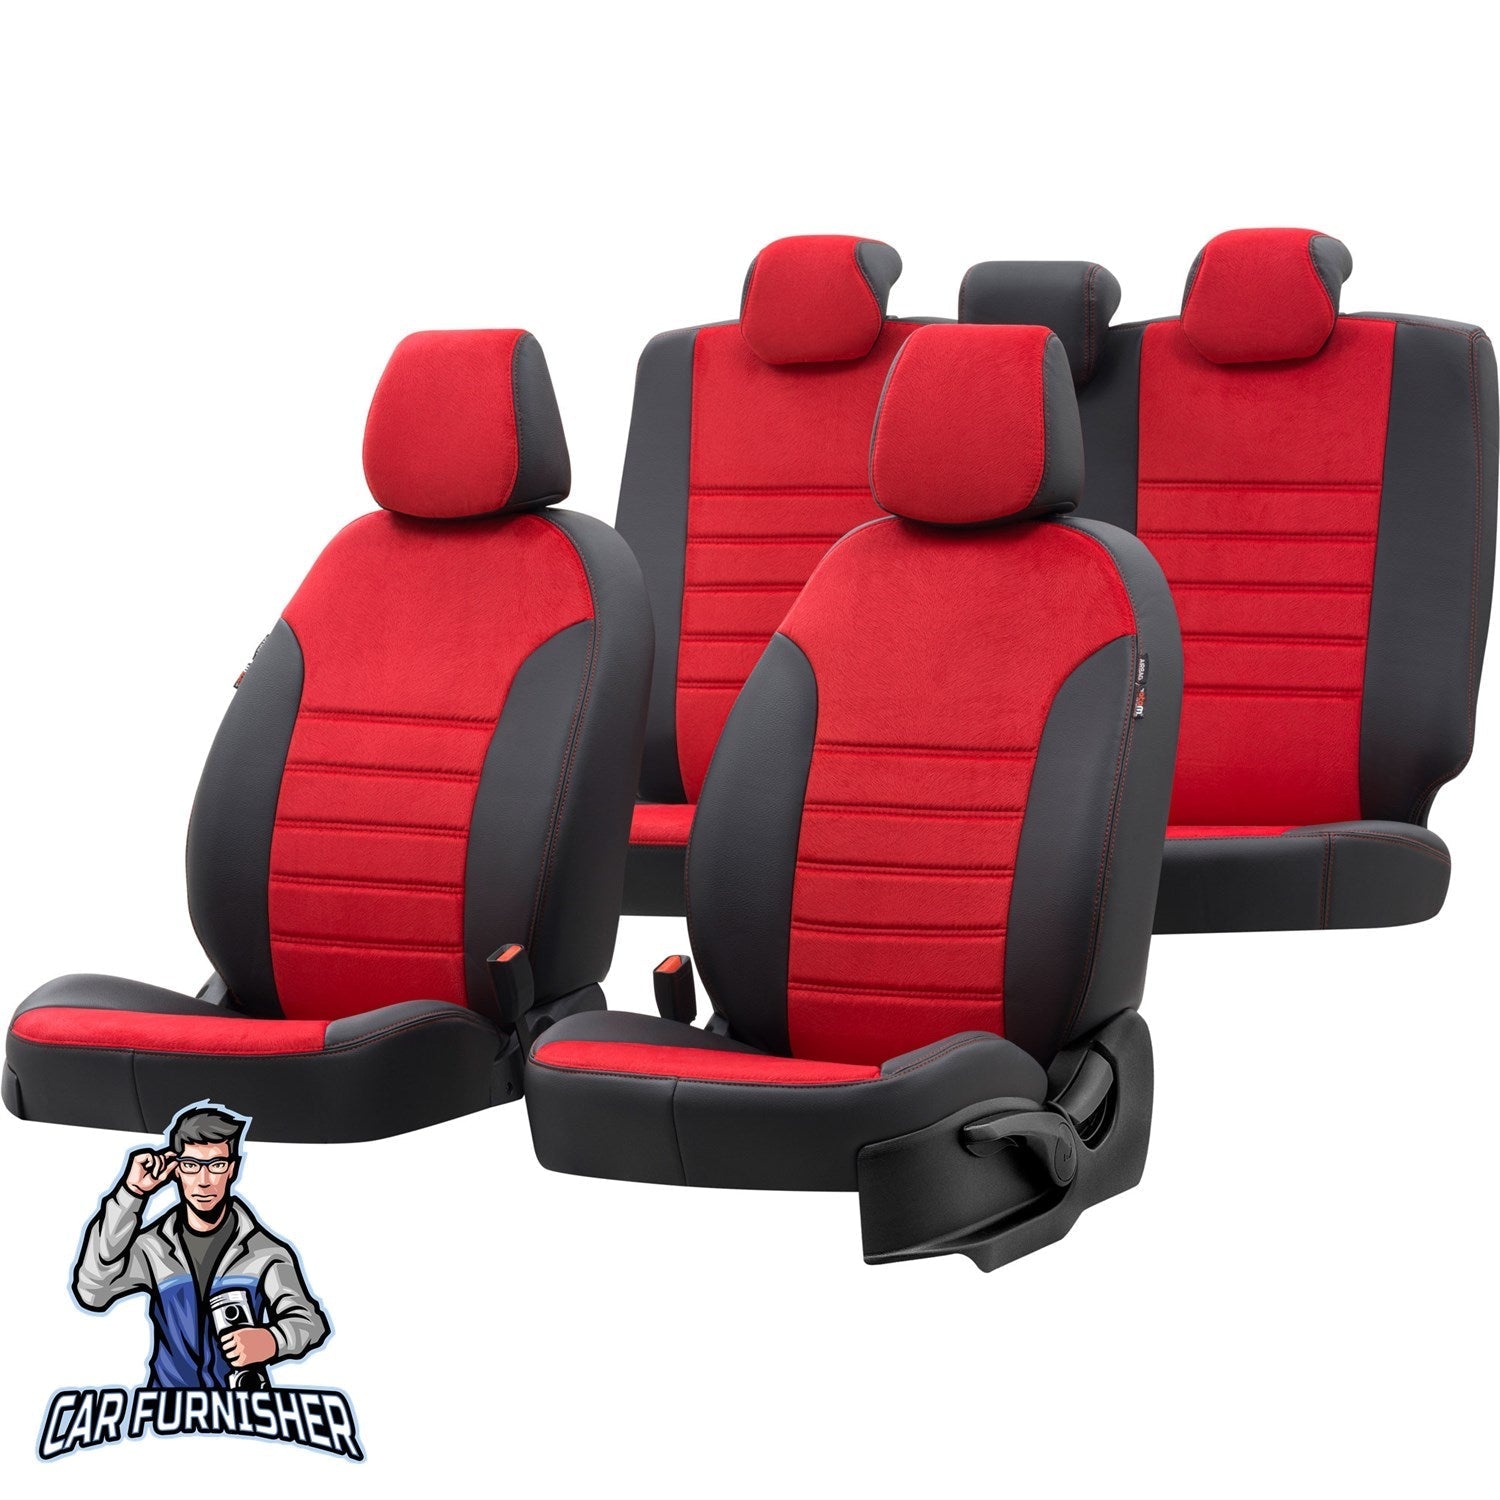 Renault Modus Car Seat Covers 2004-2008 London Design Red Full Set (5 Seats + Handrest) Leather & Fabric